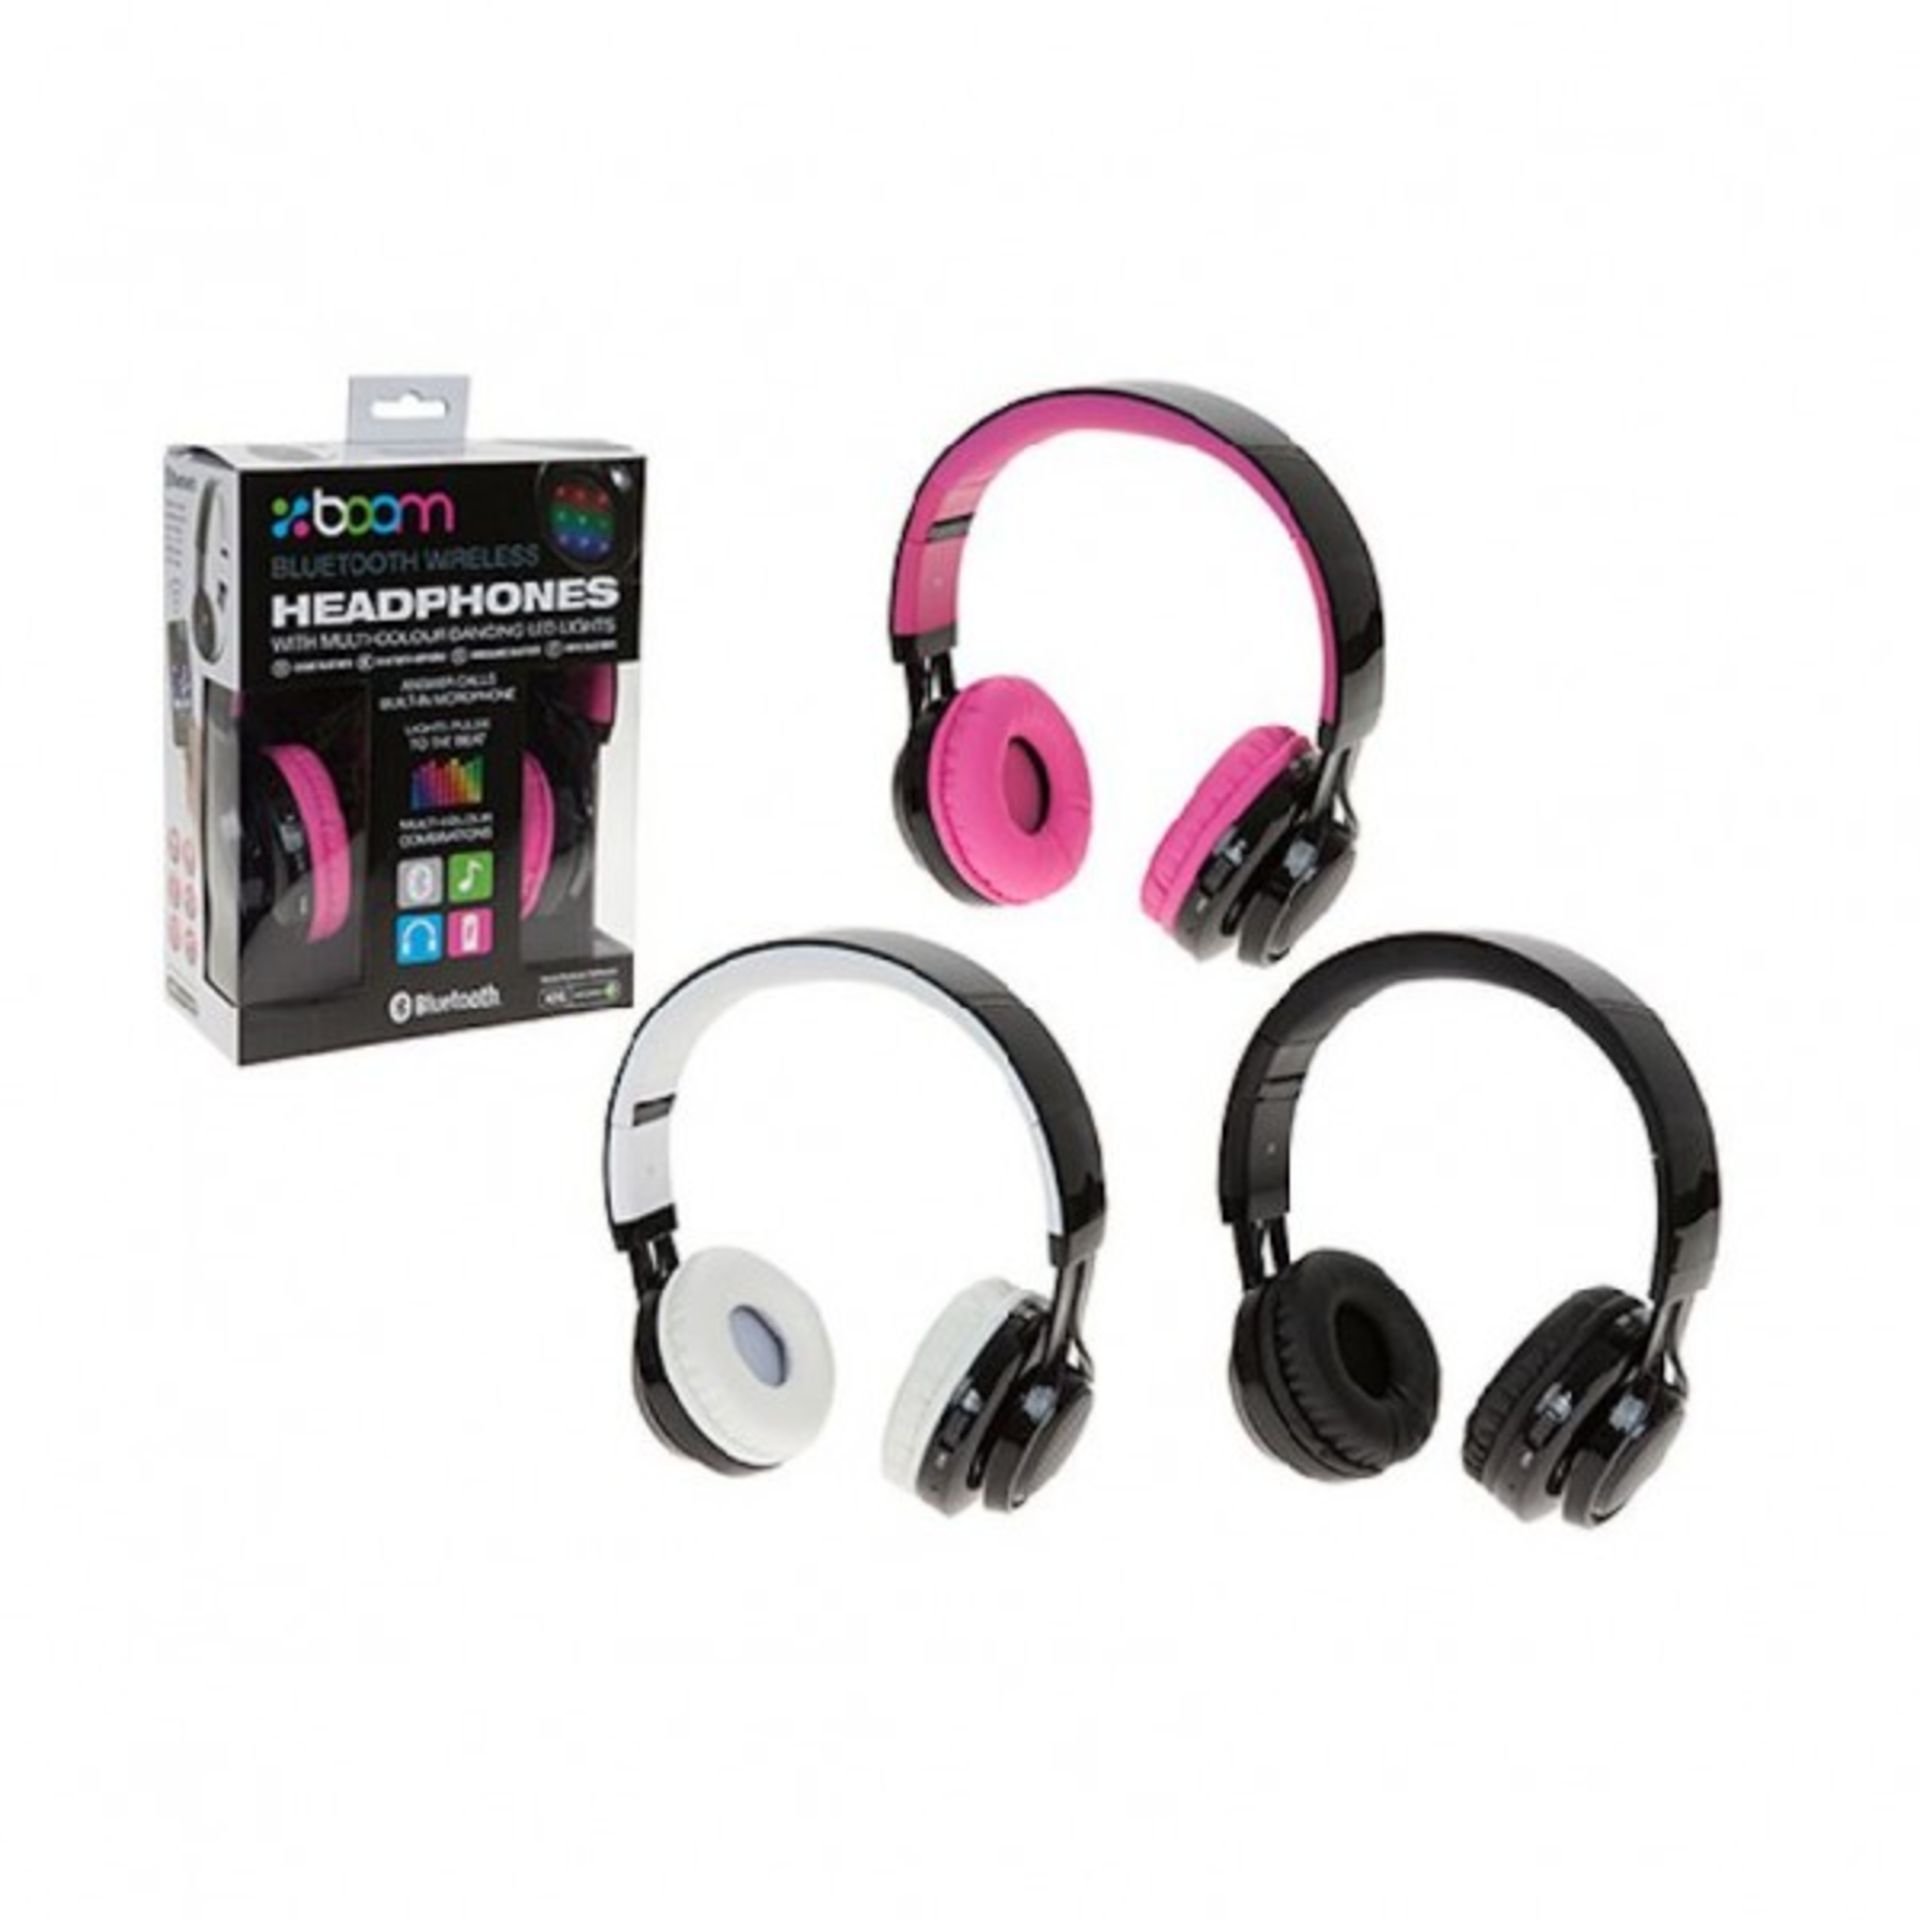 V Brand New Boom Bluetooth Wireless Headphones With Multi Colour Dancing LED Lights And Built In